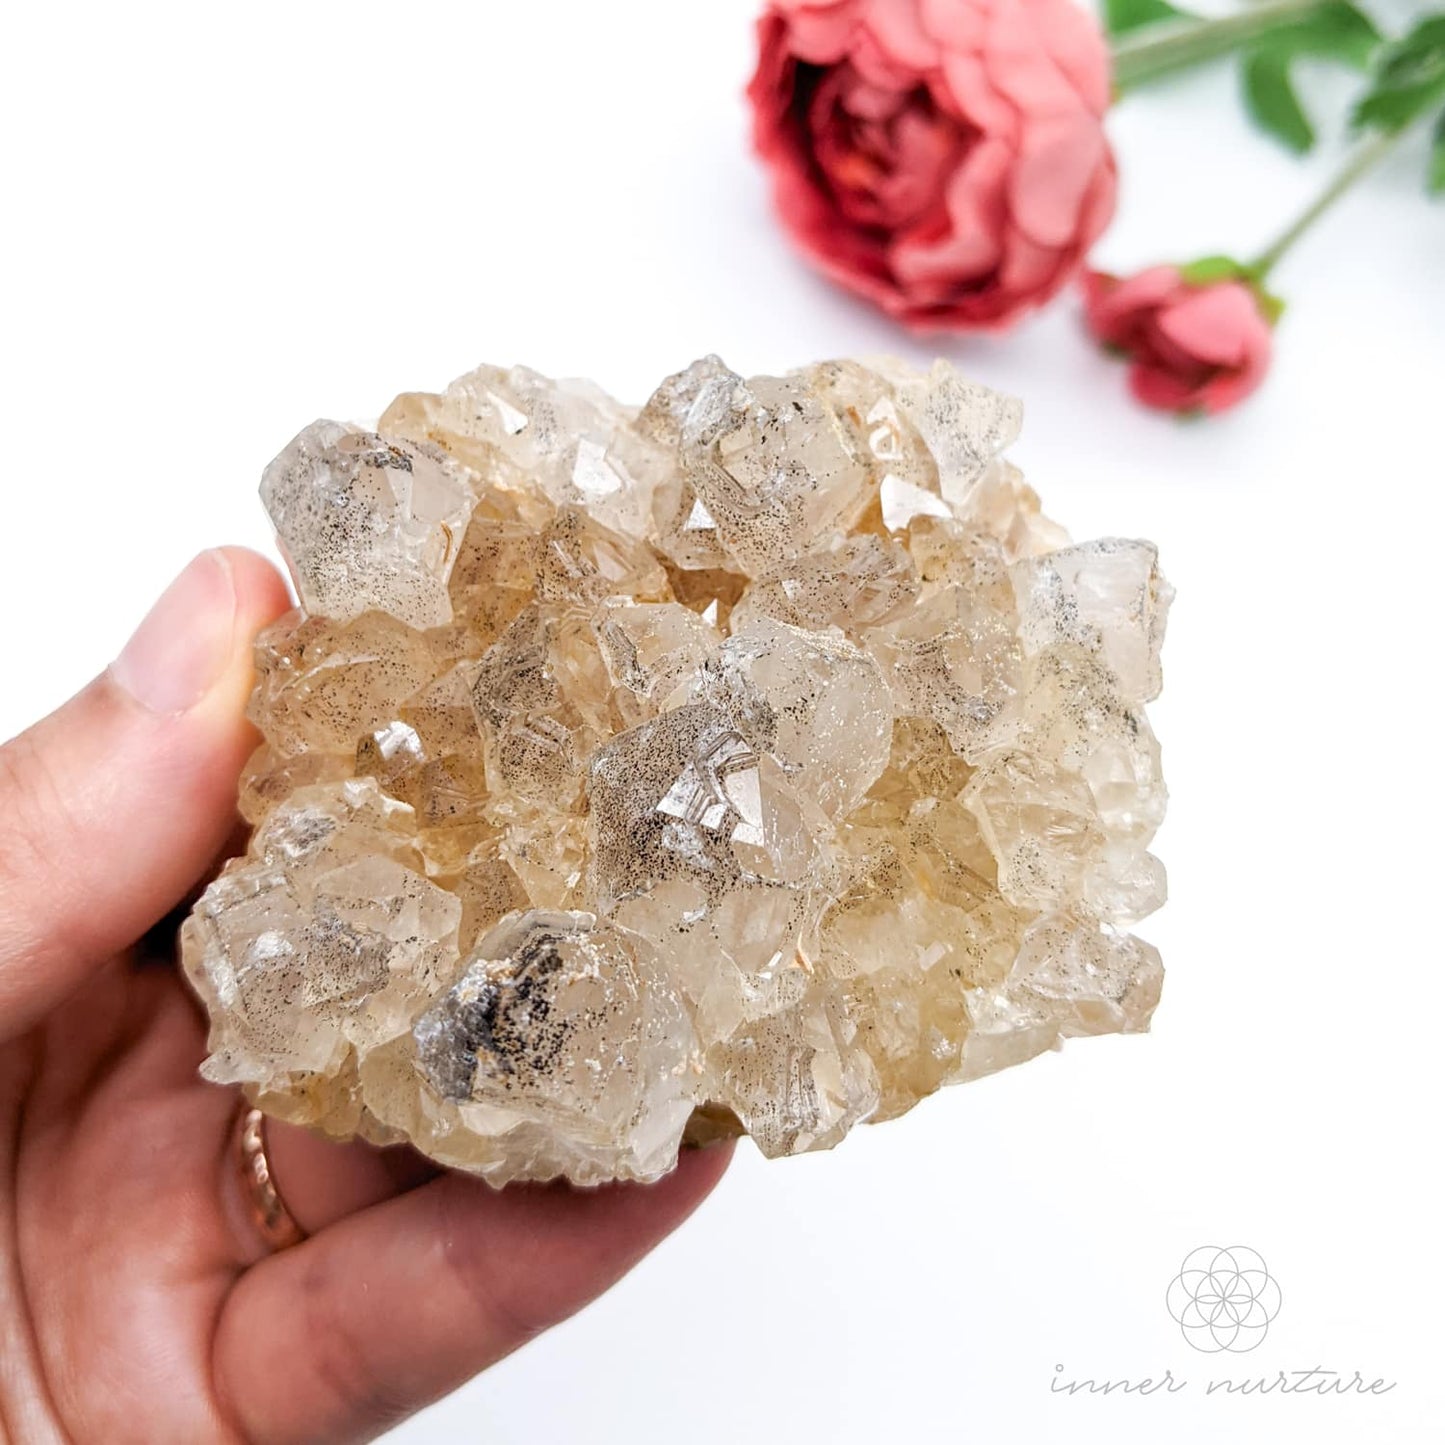 Clear Quartz Cluster With Inclusions - #6 | Crystal Shop Australia - Inner Nurture